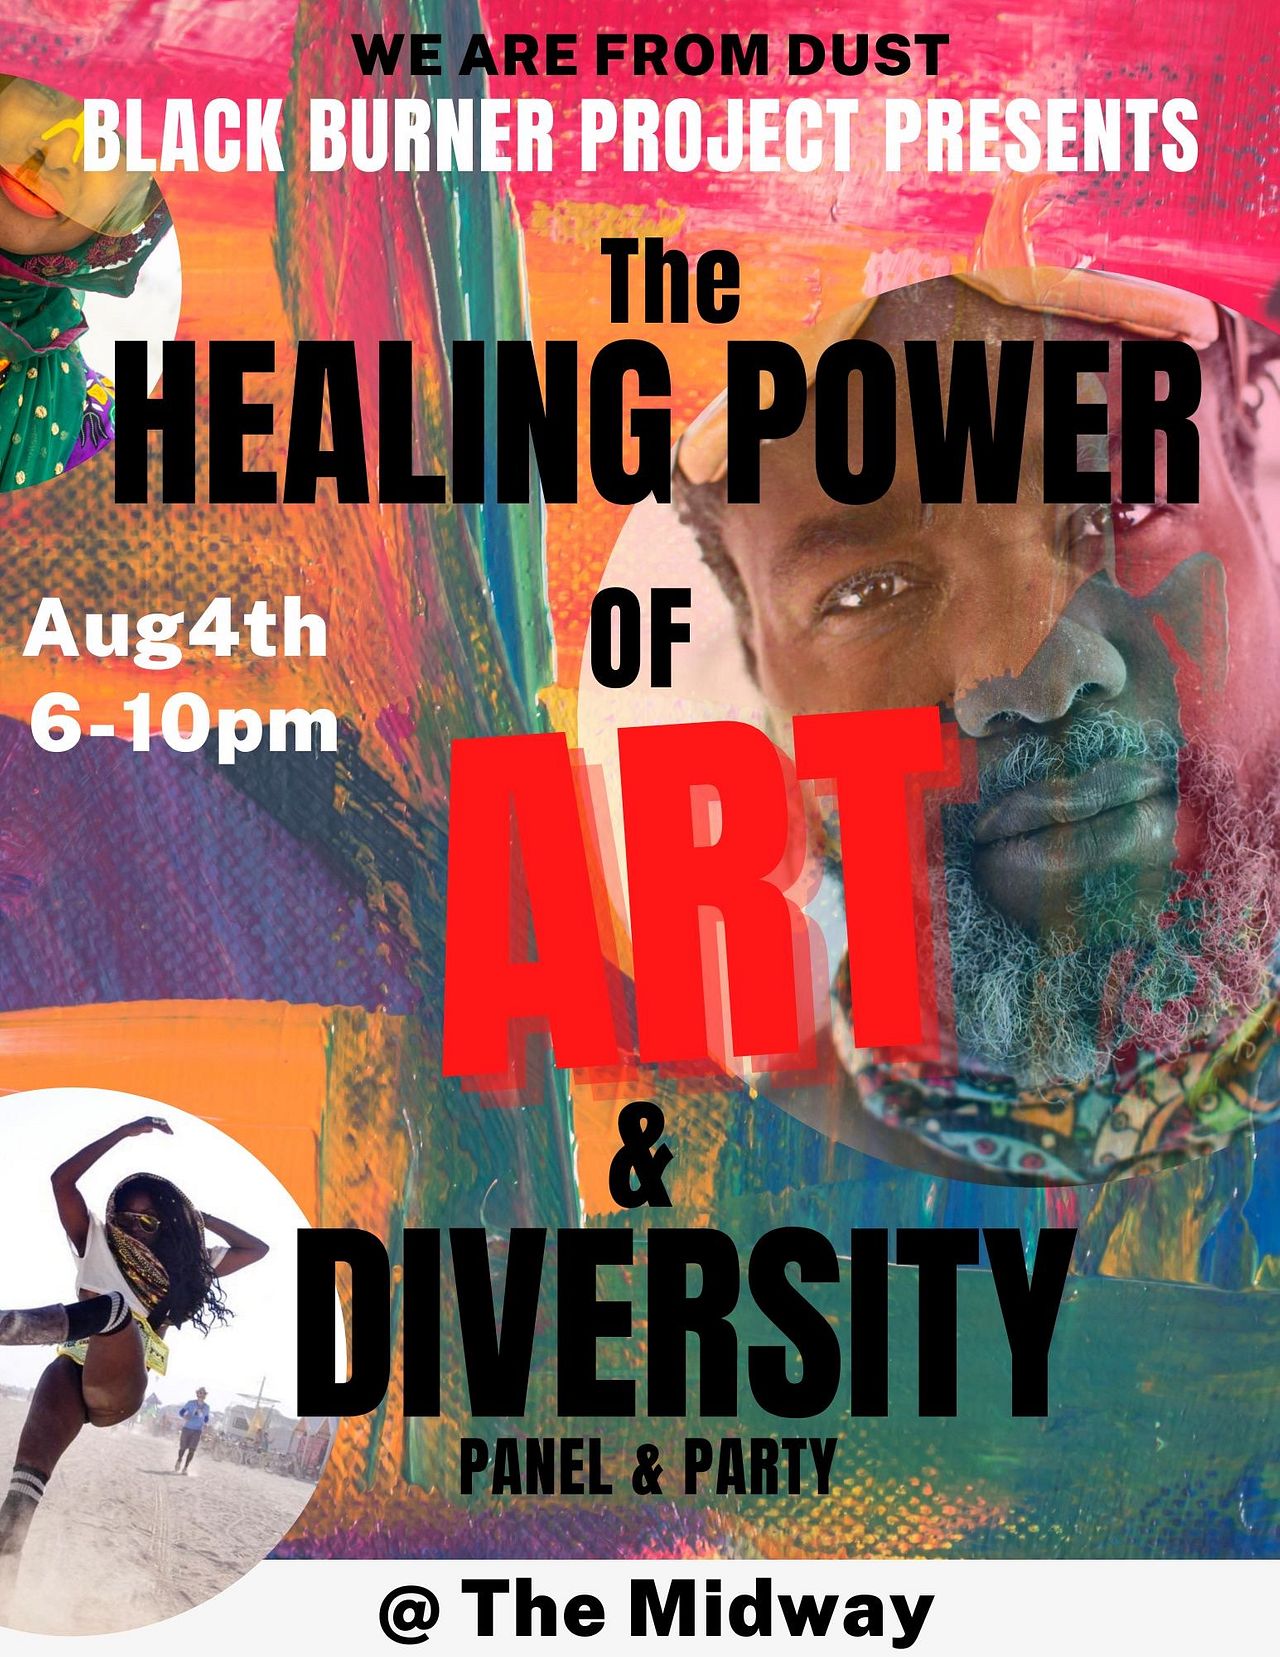 Arts & Healing Initiative  Discovery & Empowerment through the Arts